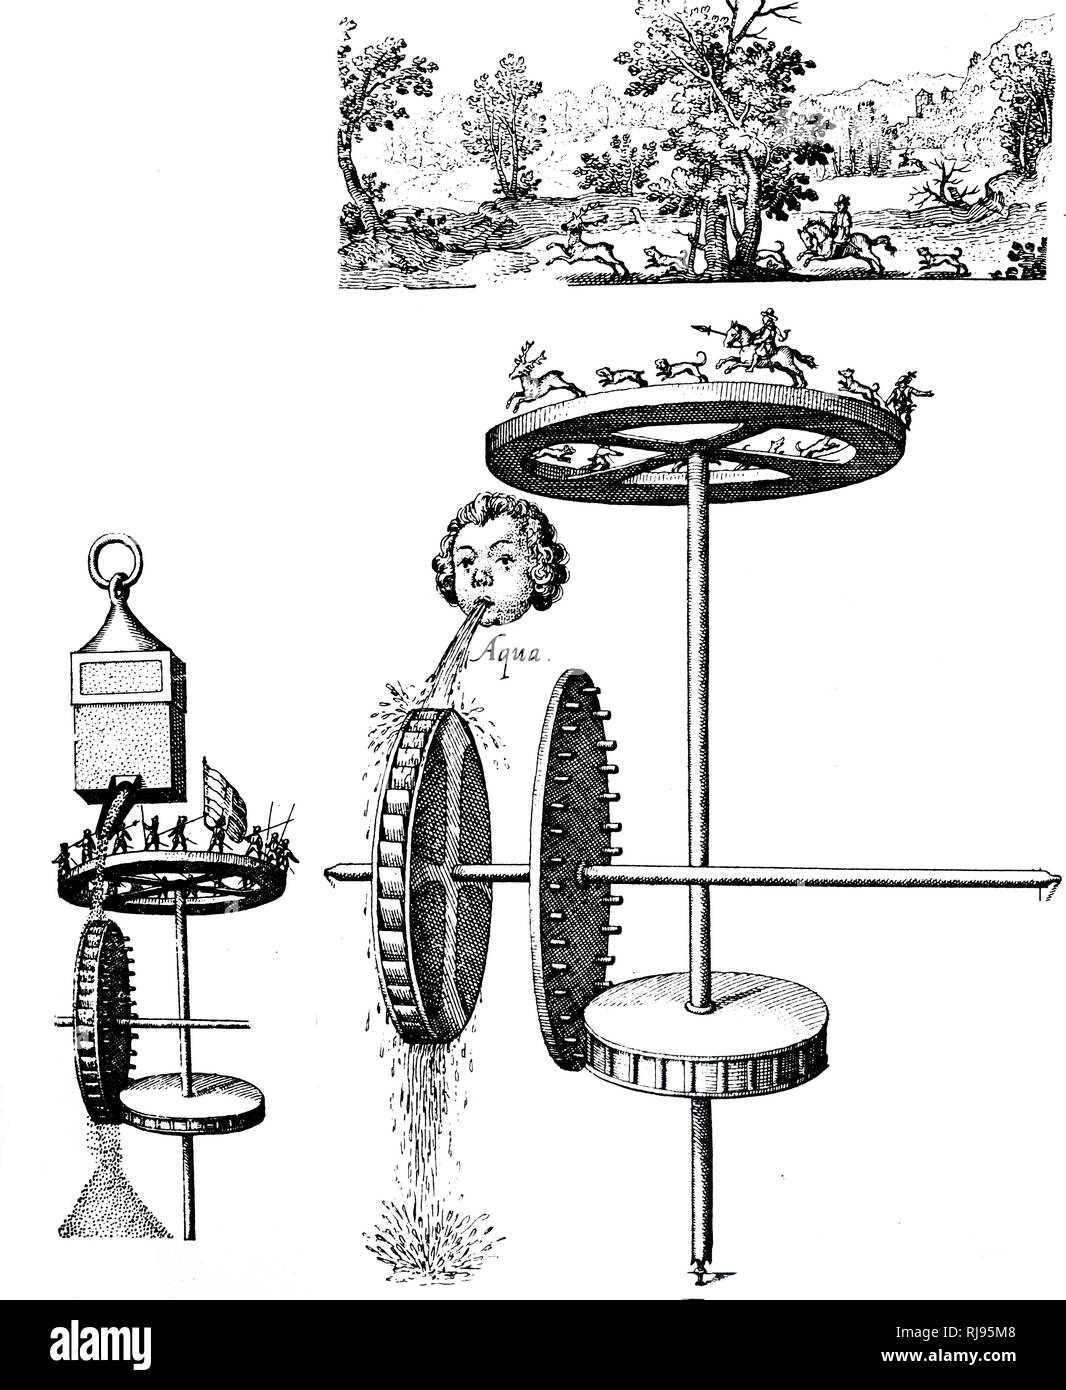 Mechanical Automata devices for rotating movements, within a diorama.  illustration from Fludd's 'Utriusque Cosmi, Maioris' 1617-1621. Robert Fludd, also known as Robertus de Fluctibus (1574 – 1637), was a prominent English Paracelsian physician with both scientific and occult interests. Stock Photo